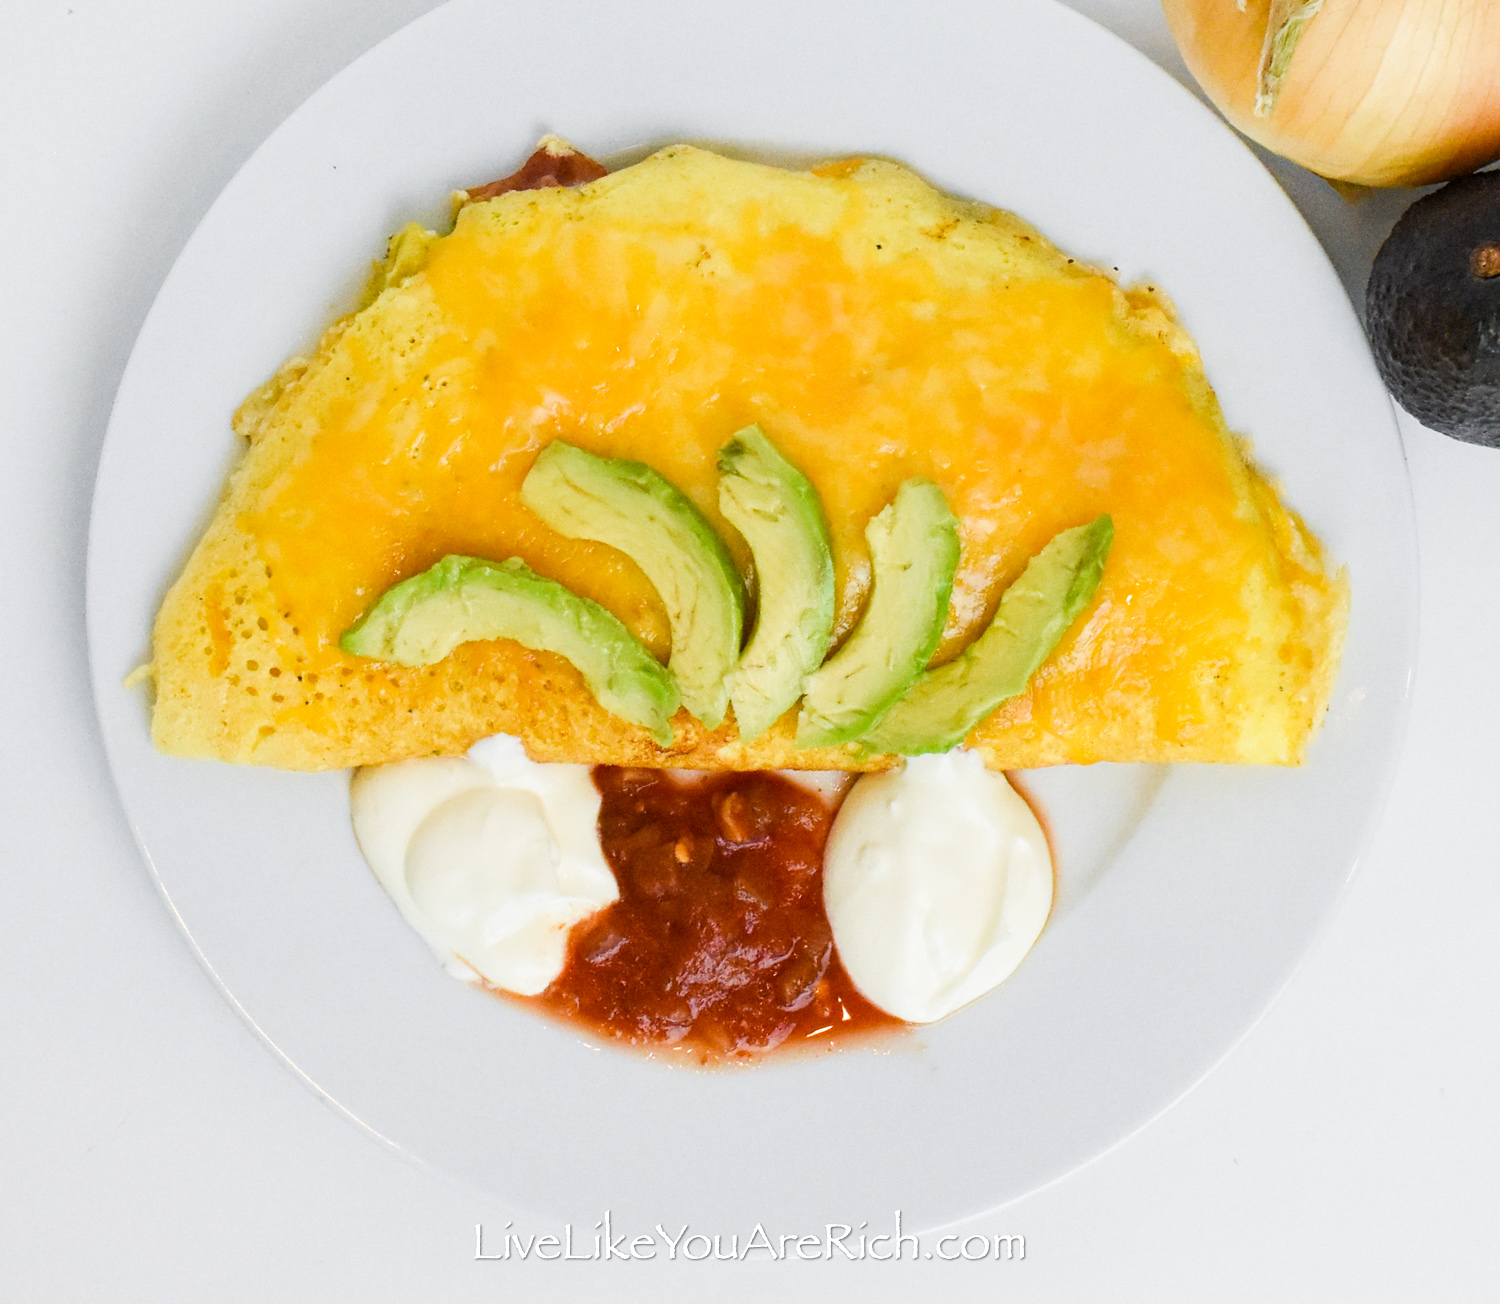 Restaurant style omelette with salsa